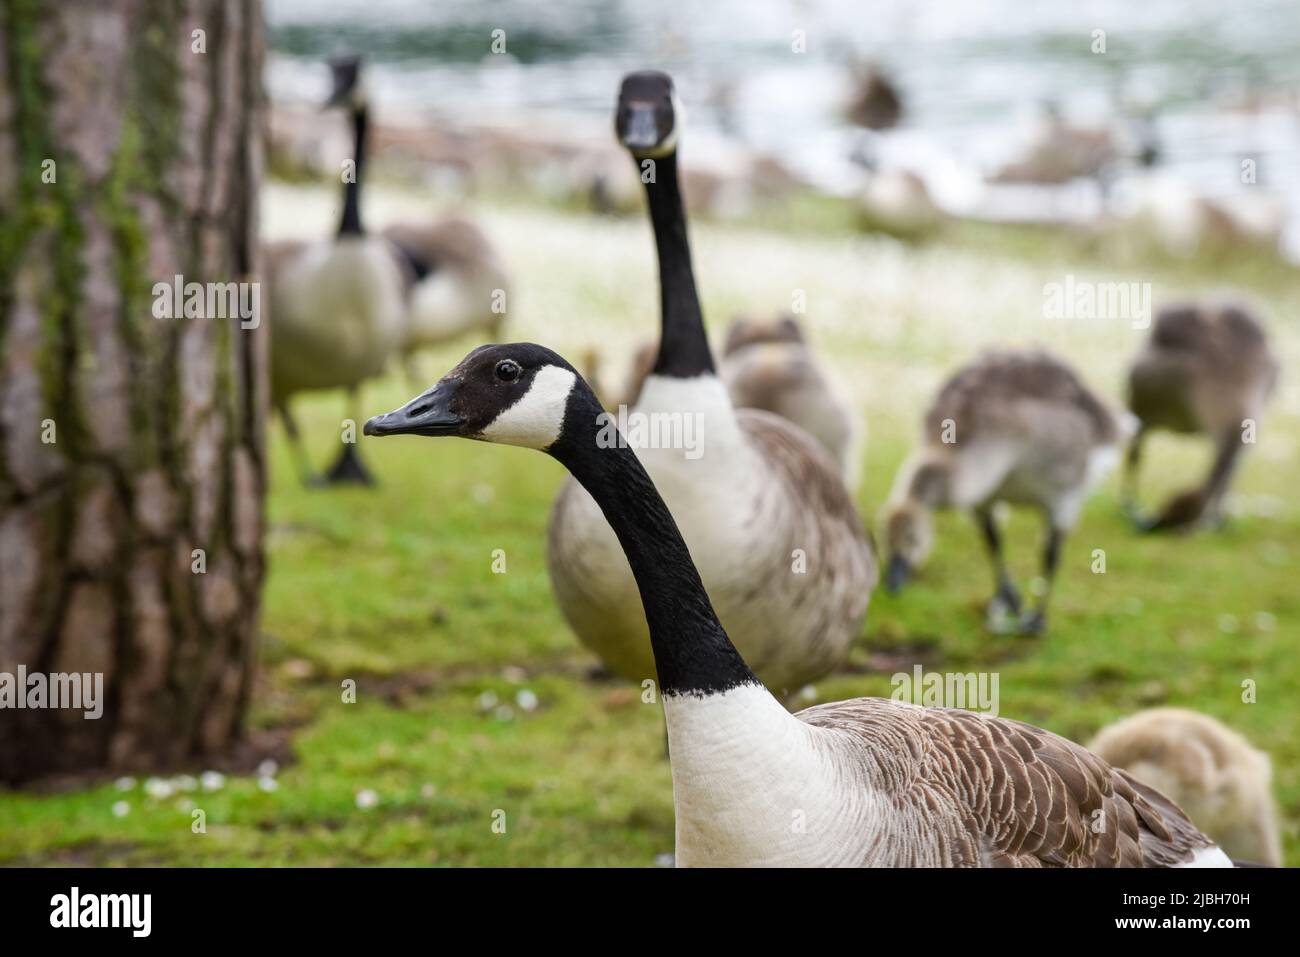 Baby goose chicks or goslings feed at the river bank protected by adult geese Stock Photo